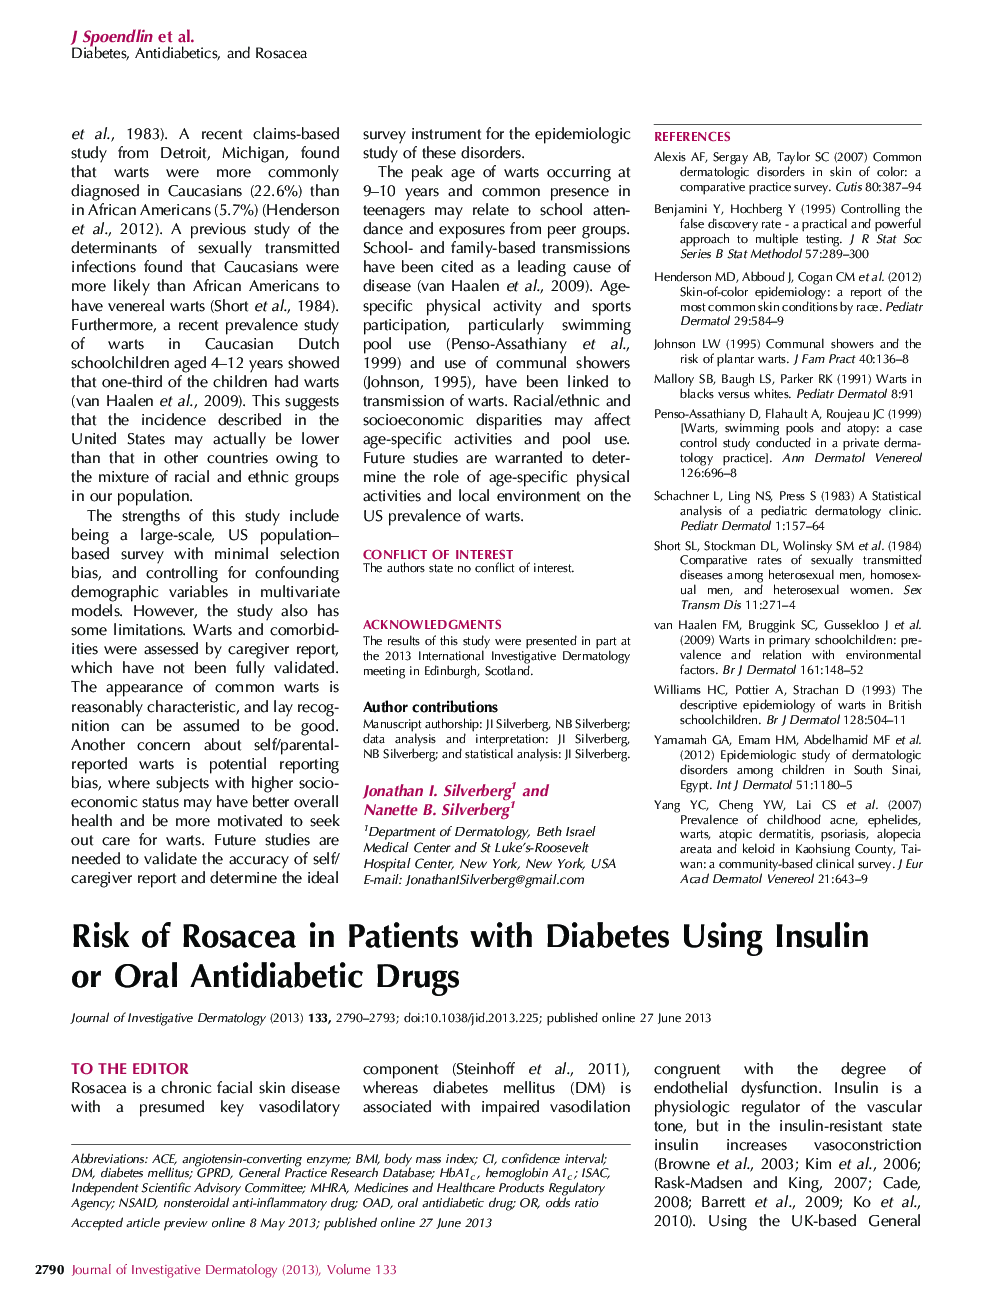 Risk of Rosacea in Patients with Diabetes Using Insulin or Oral Antidiabetic Drugs